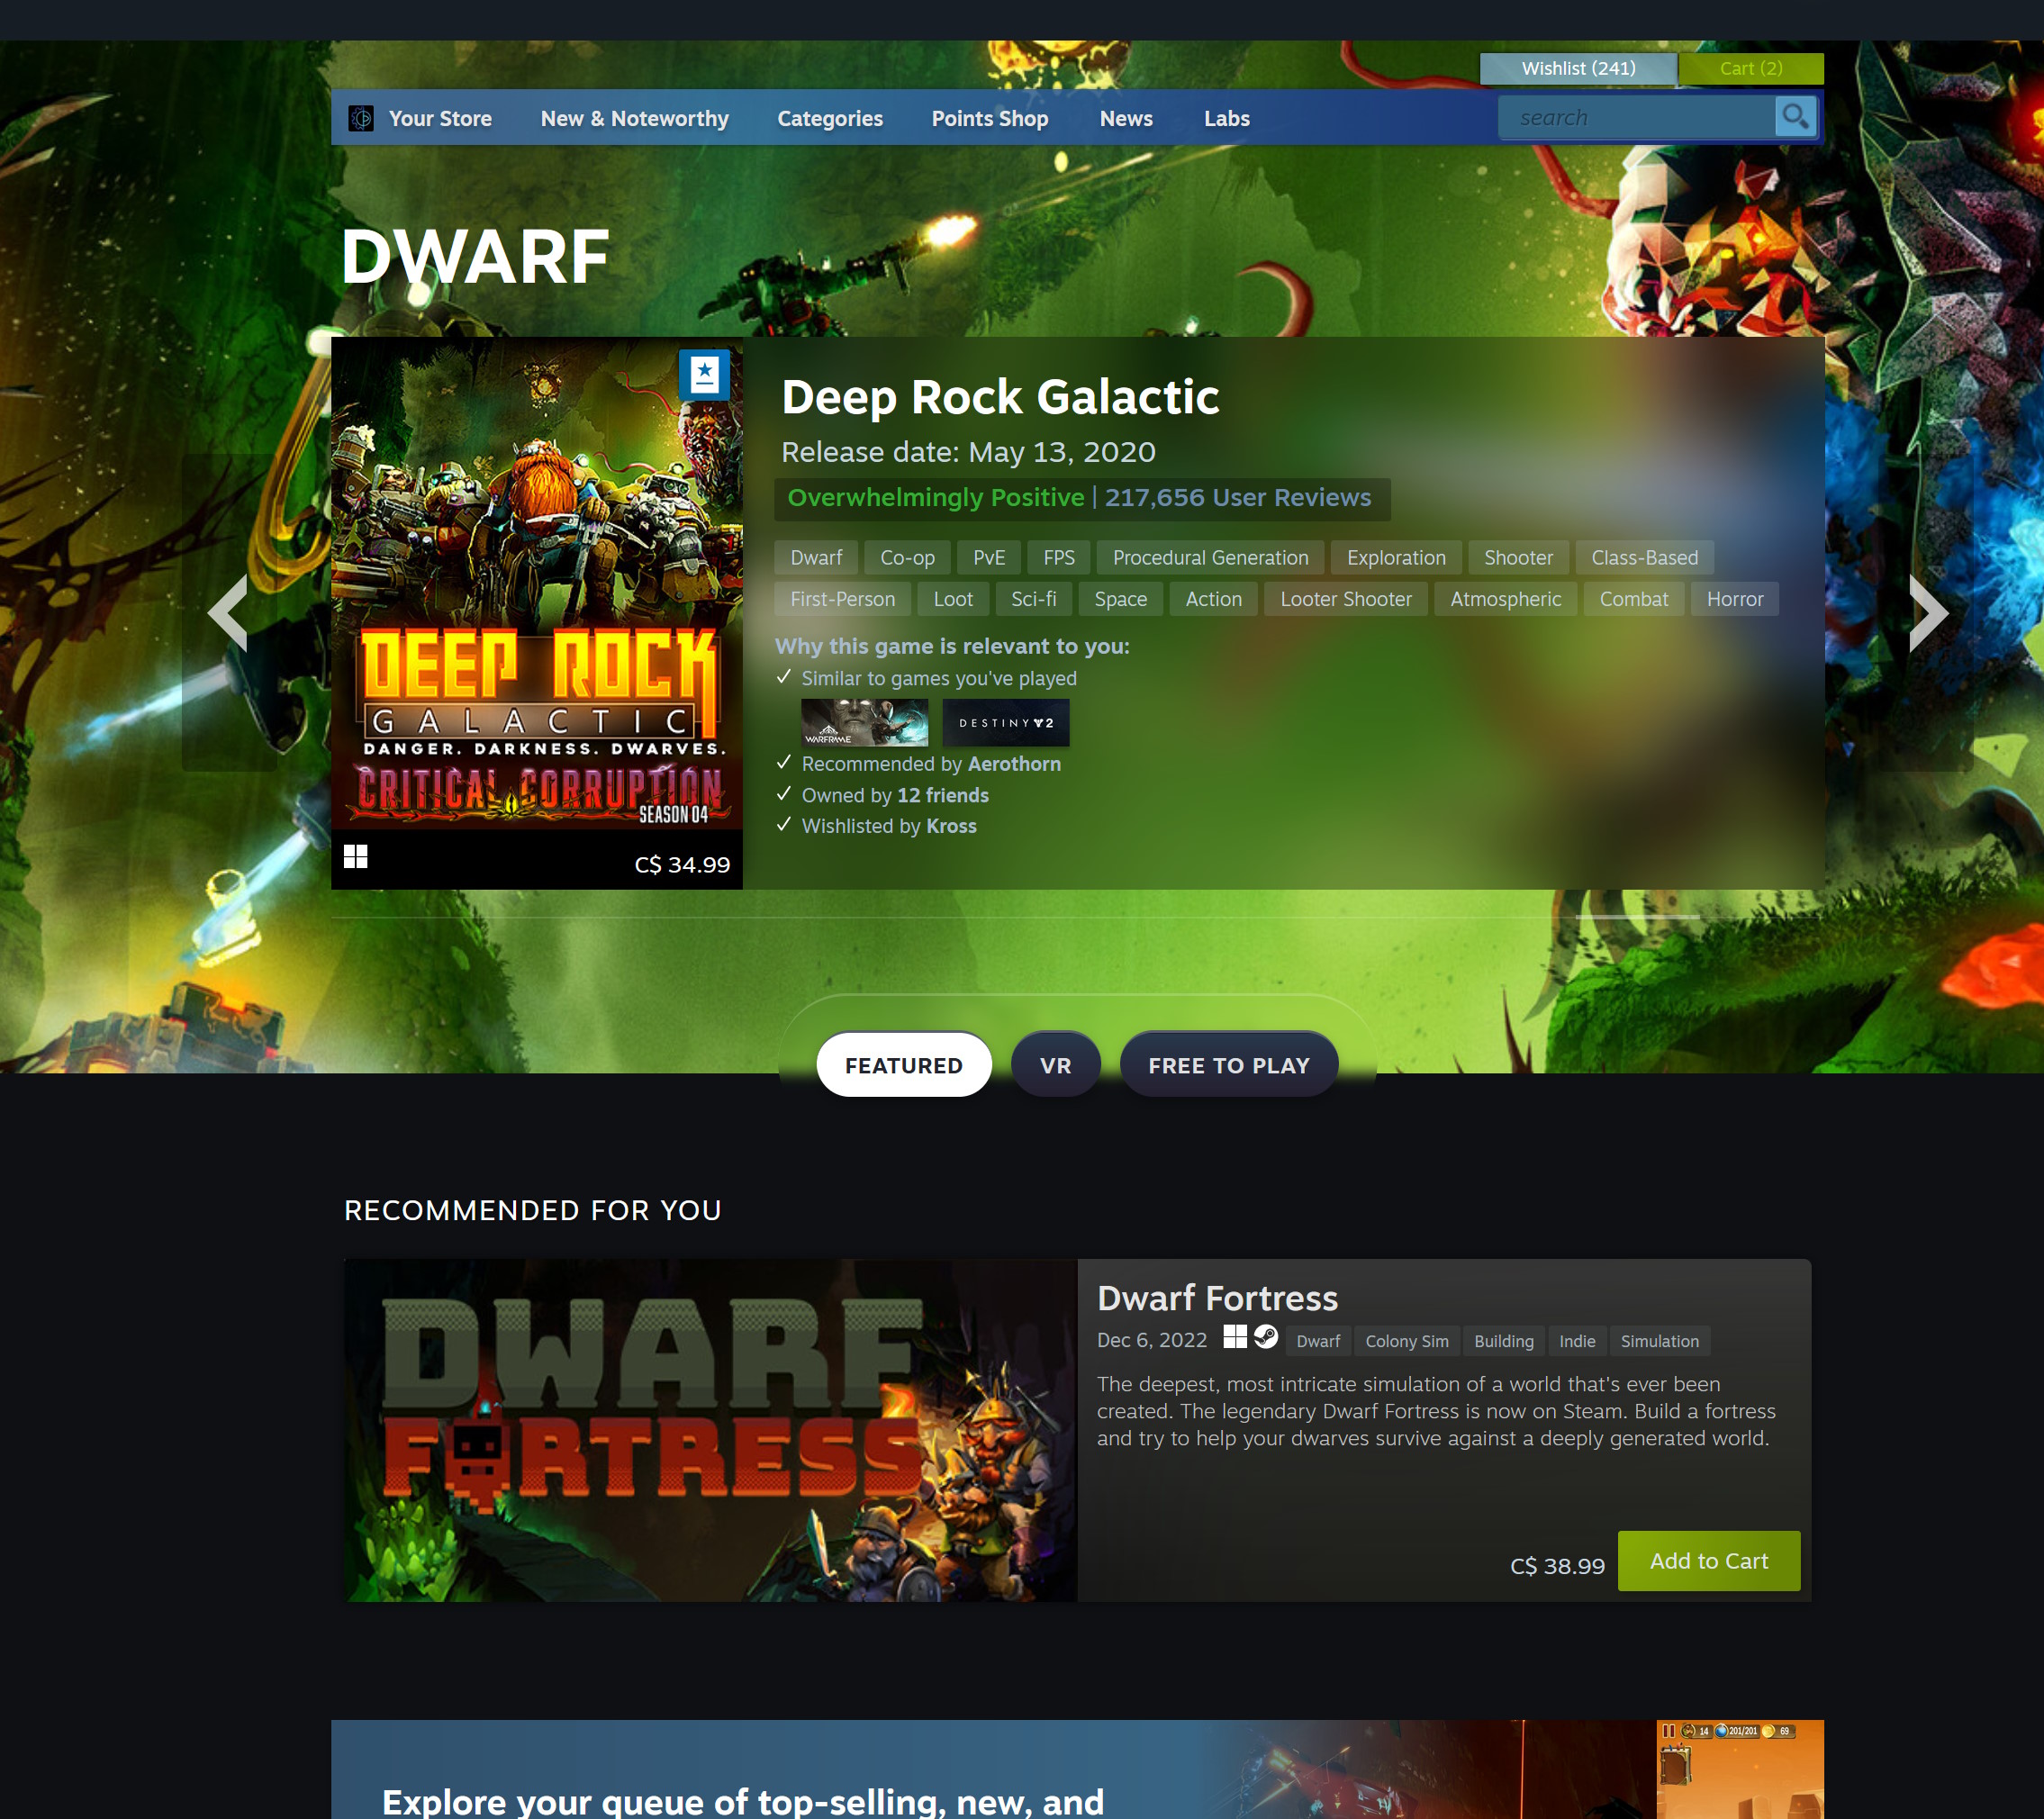 Steam's dwarf featured category page